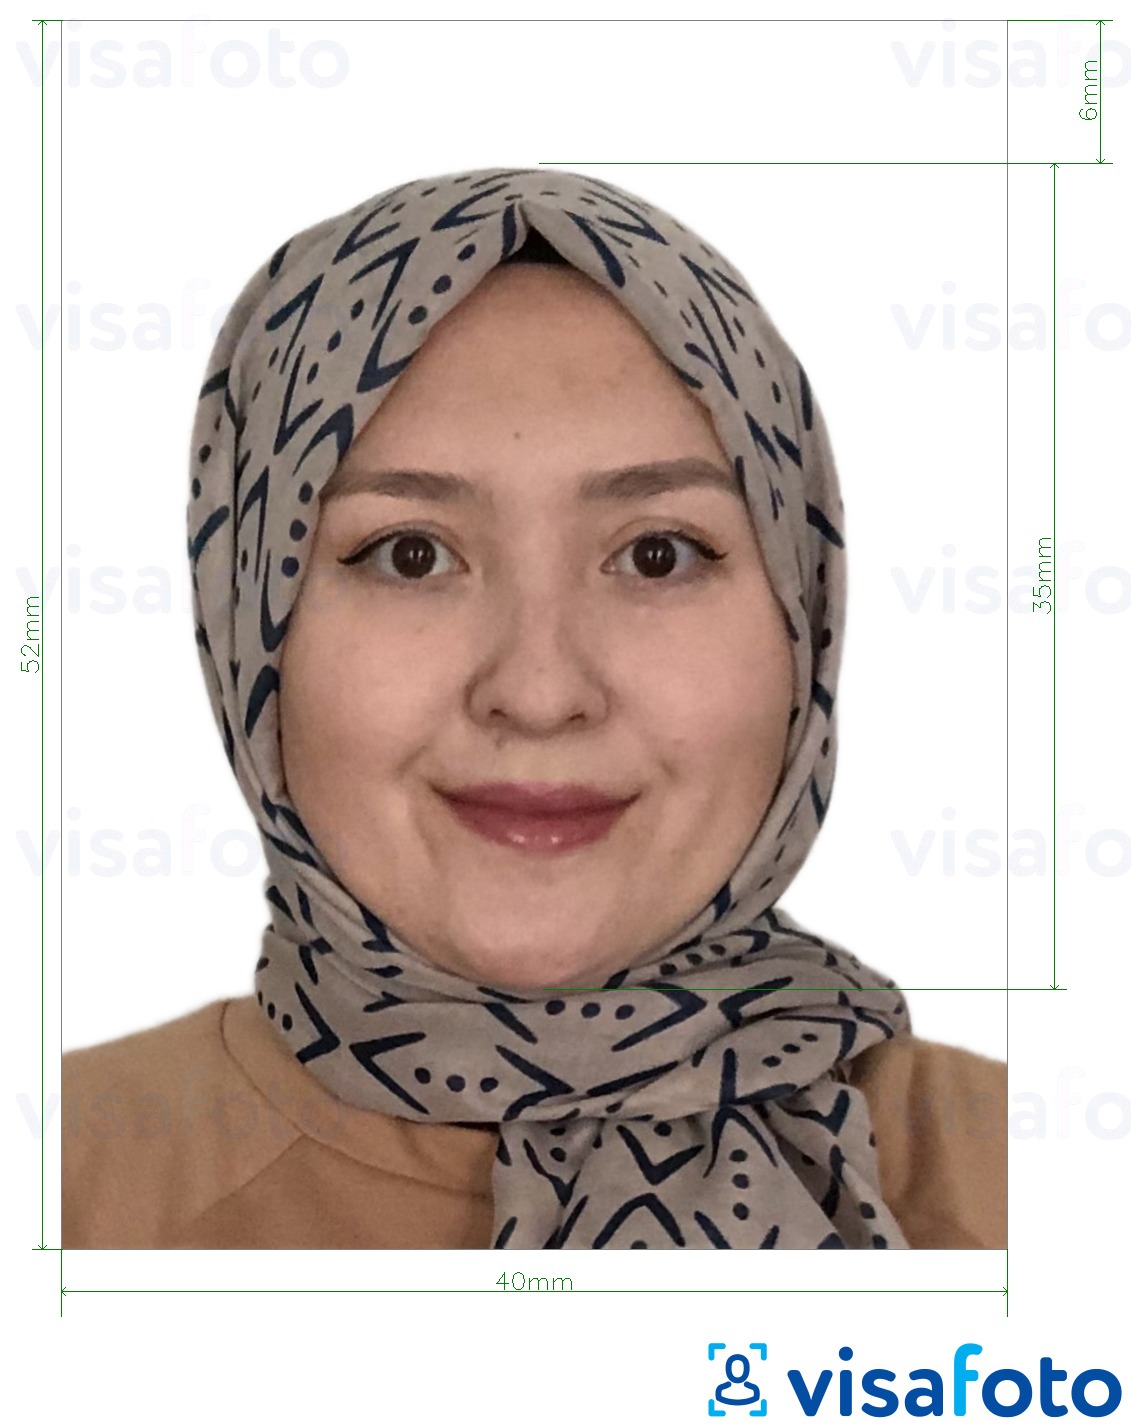 Example of photo for Brunei passport 5.2x4 cm (52x40 mm) with exact size specification